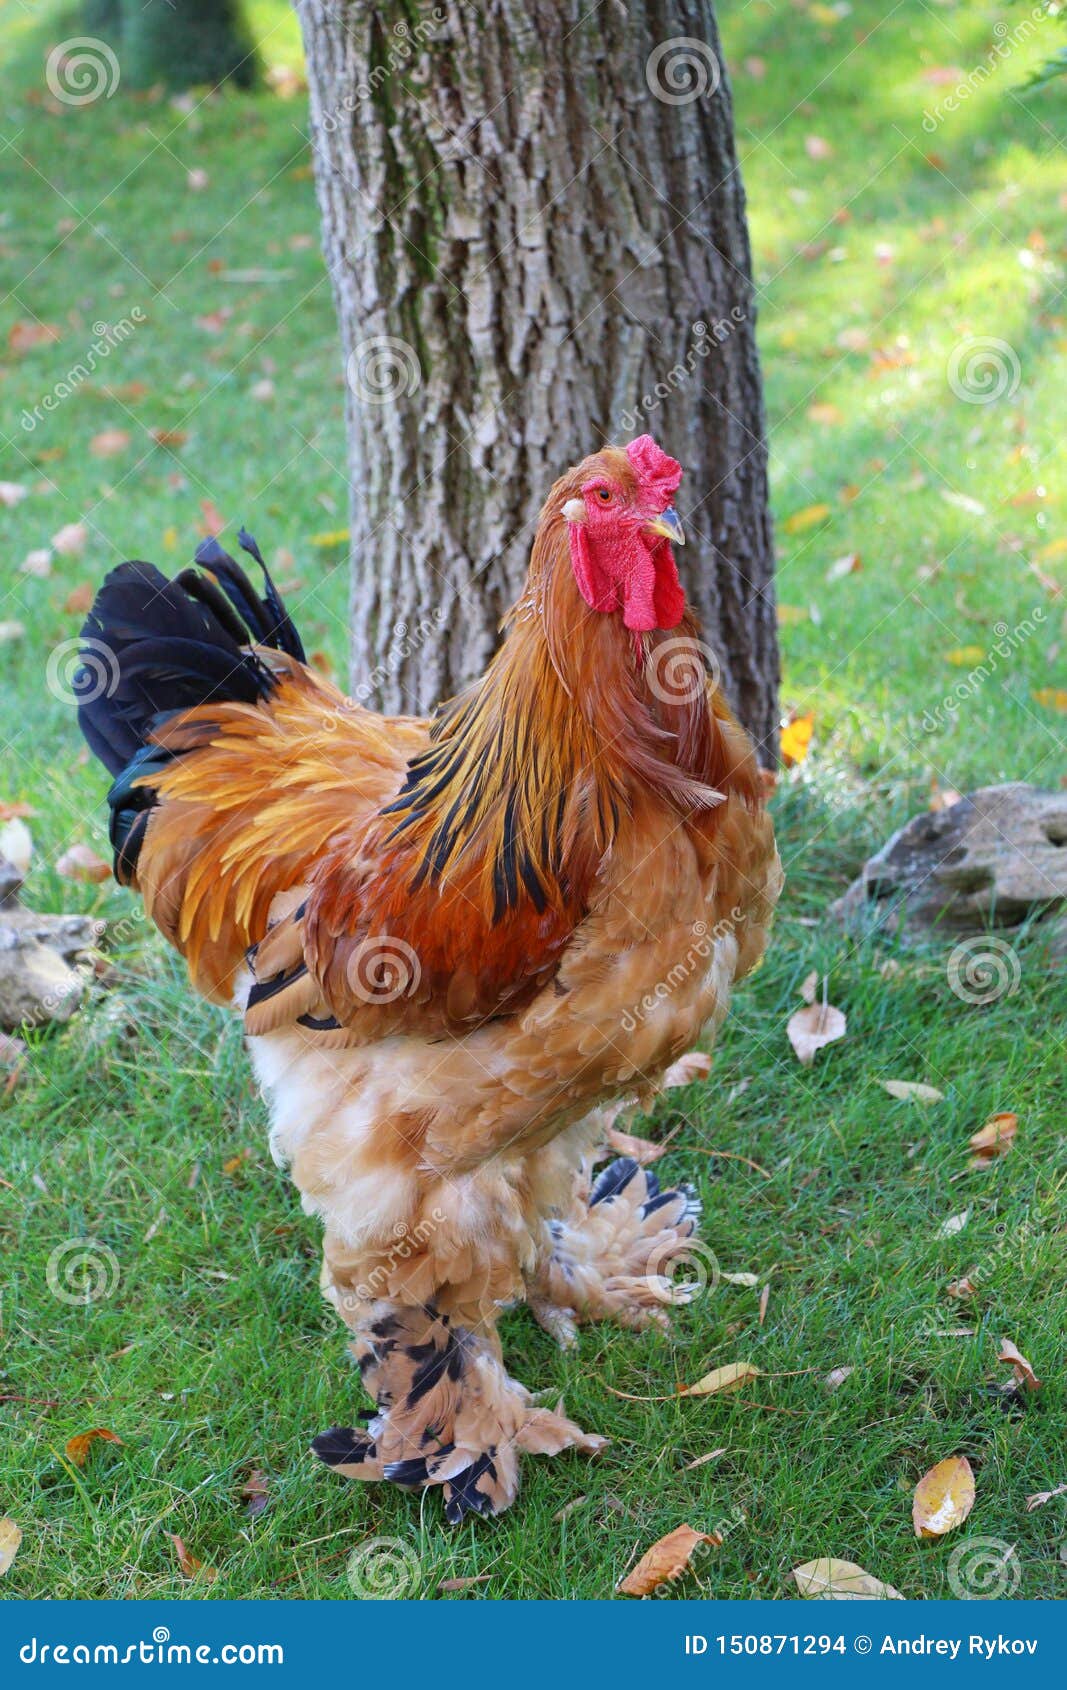 Buff Brahma Stands on the Grass Stock Photo - Image of bantam